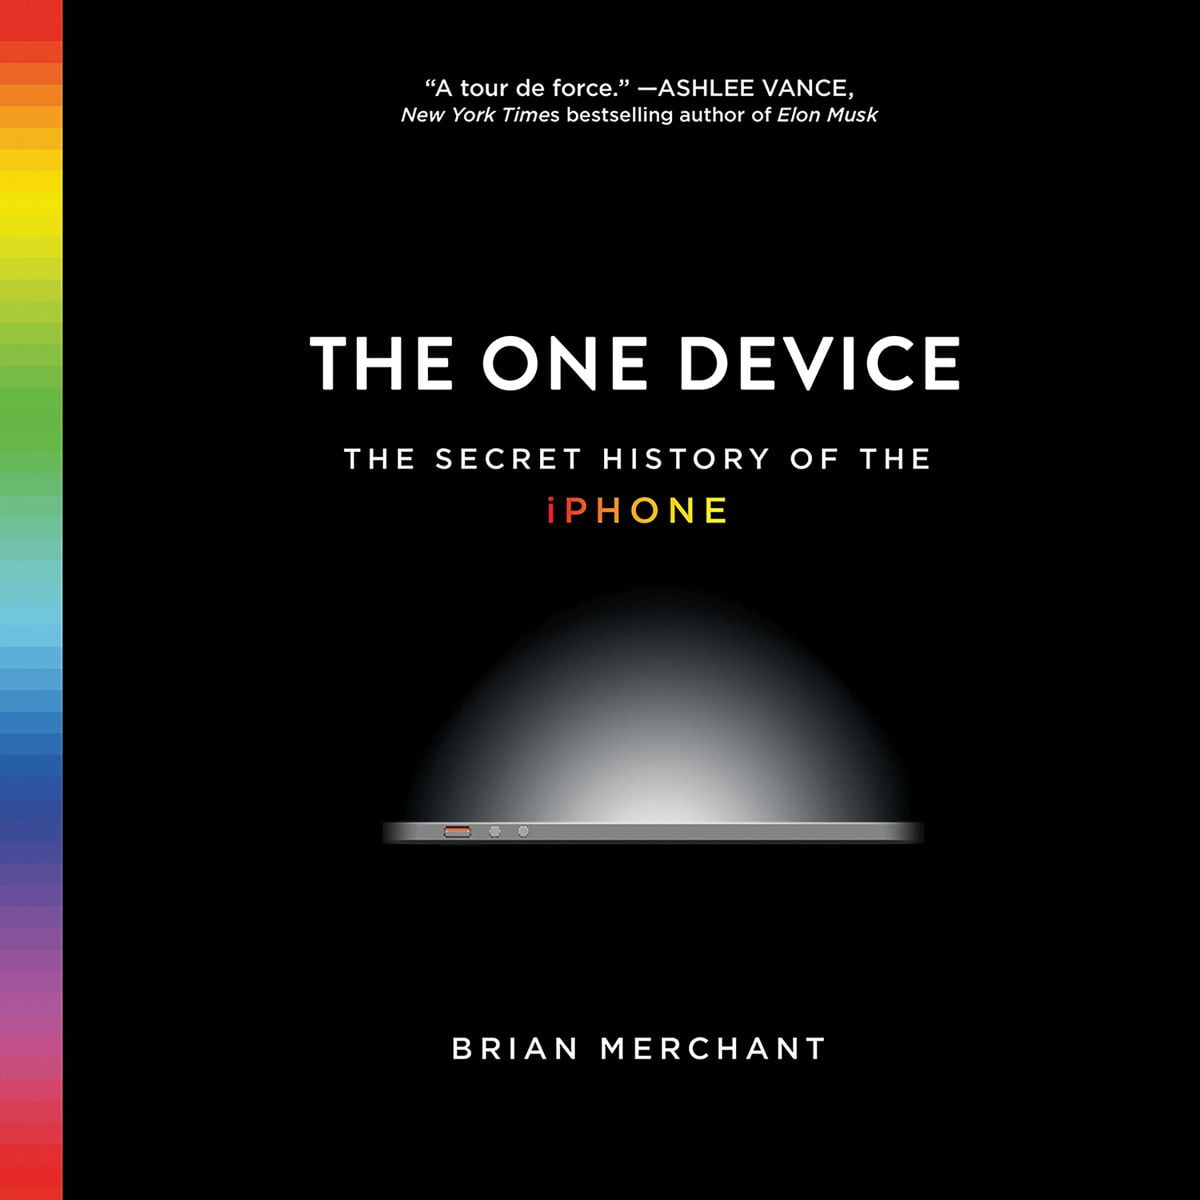 Picture of Blackstone Audio 9781478949633 The One Device - The Secret History Of The Iphone Audio Book